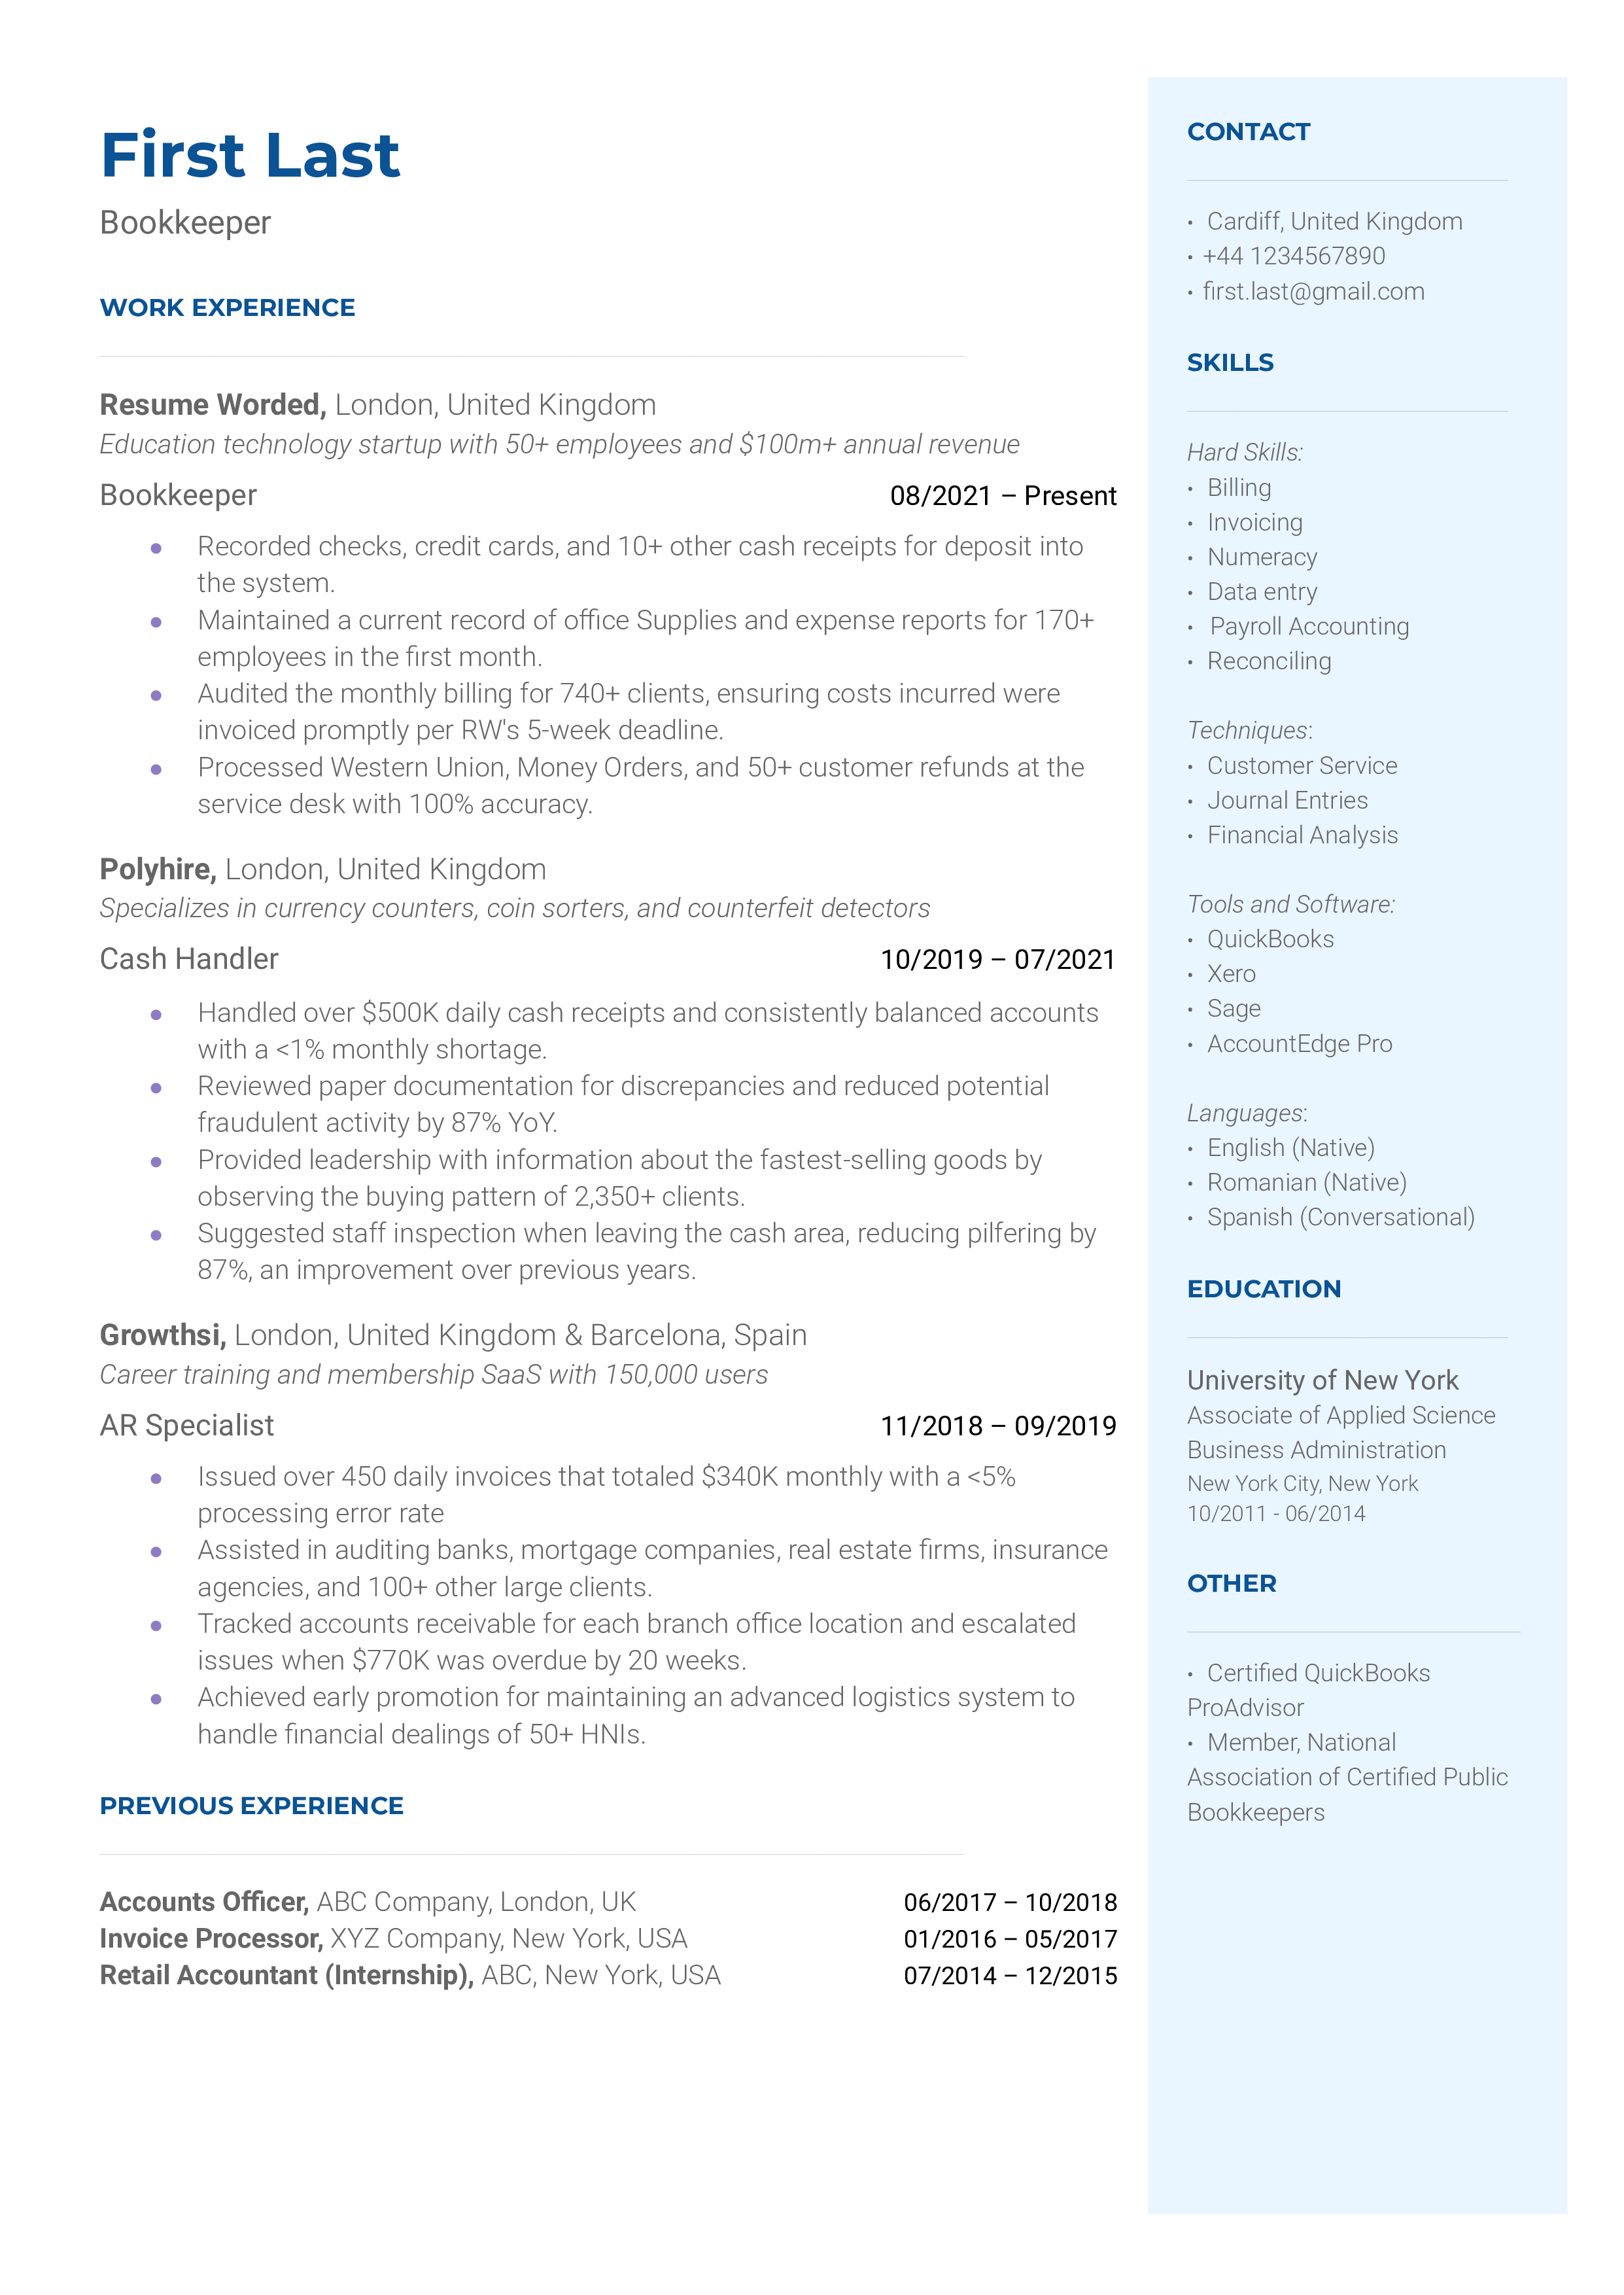 A well-structured CV for a Bookkeeper, featuring specific software knowledge and automation experience.